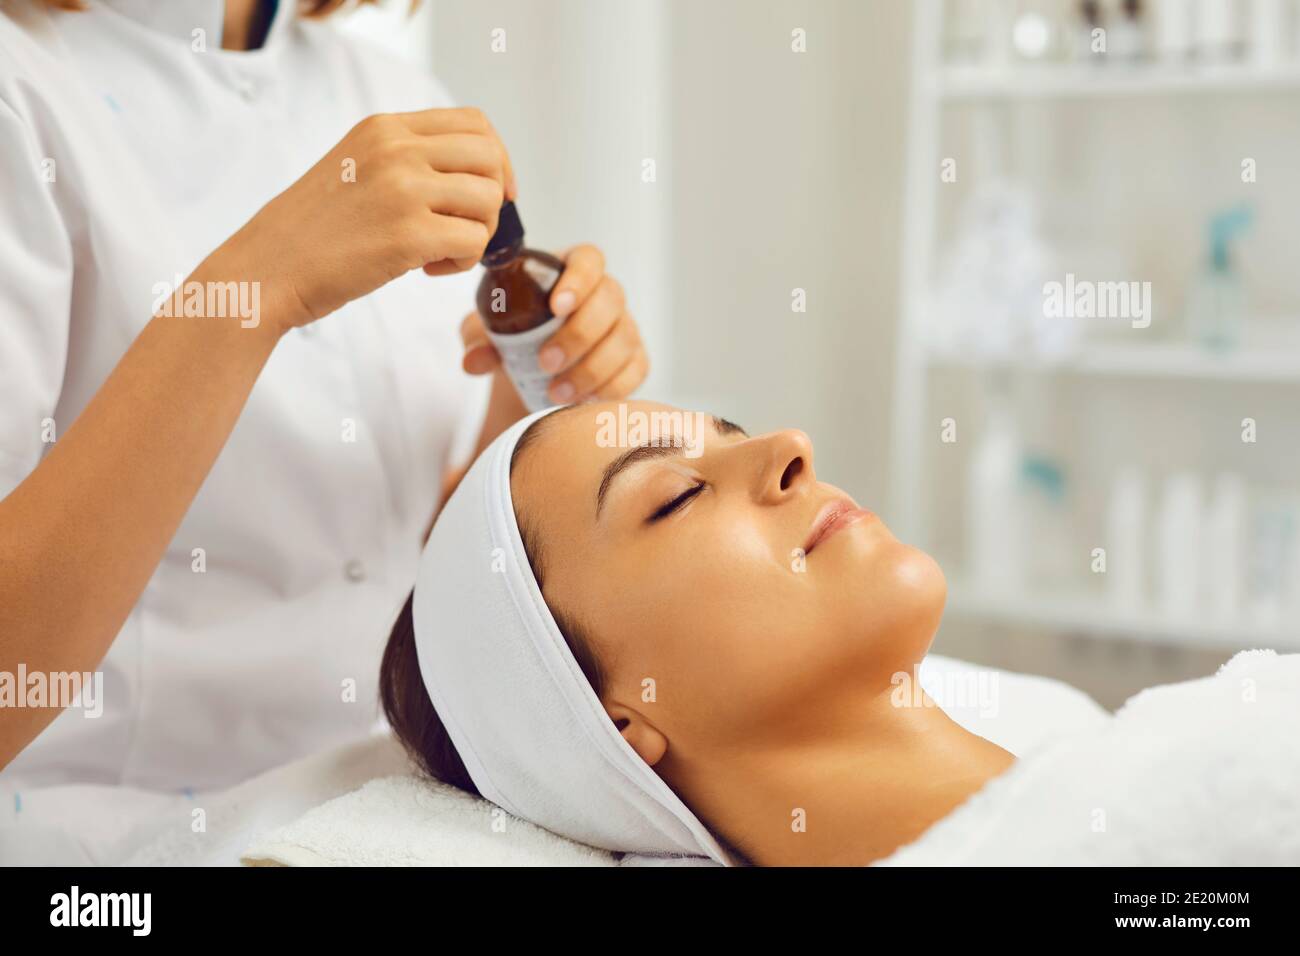 Hands of therapist ready to put nourishing skin oil to young womans face during skincare procedure Stock Photo